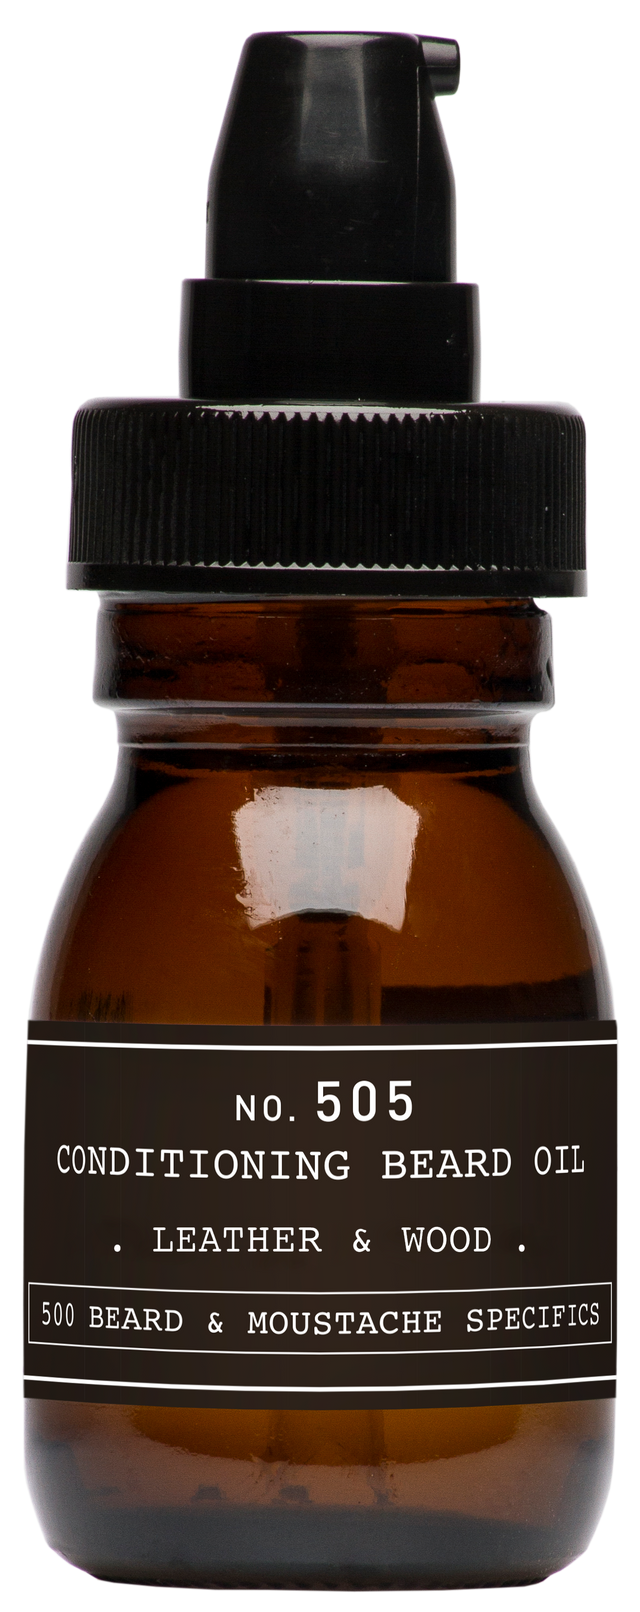 No. 505 Conditioning Beard Oil - Leather & Wood Image thumbnail